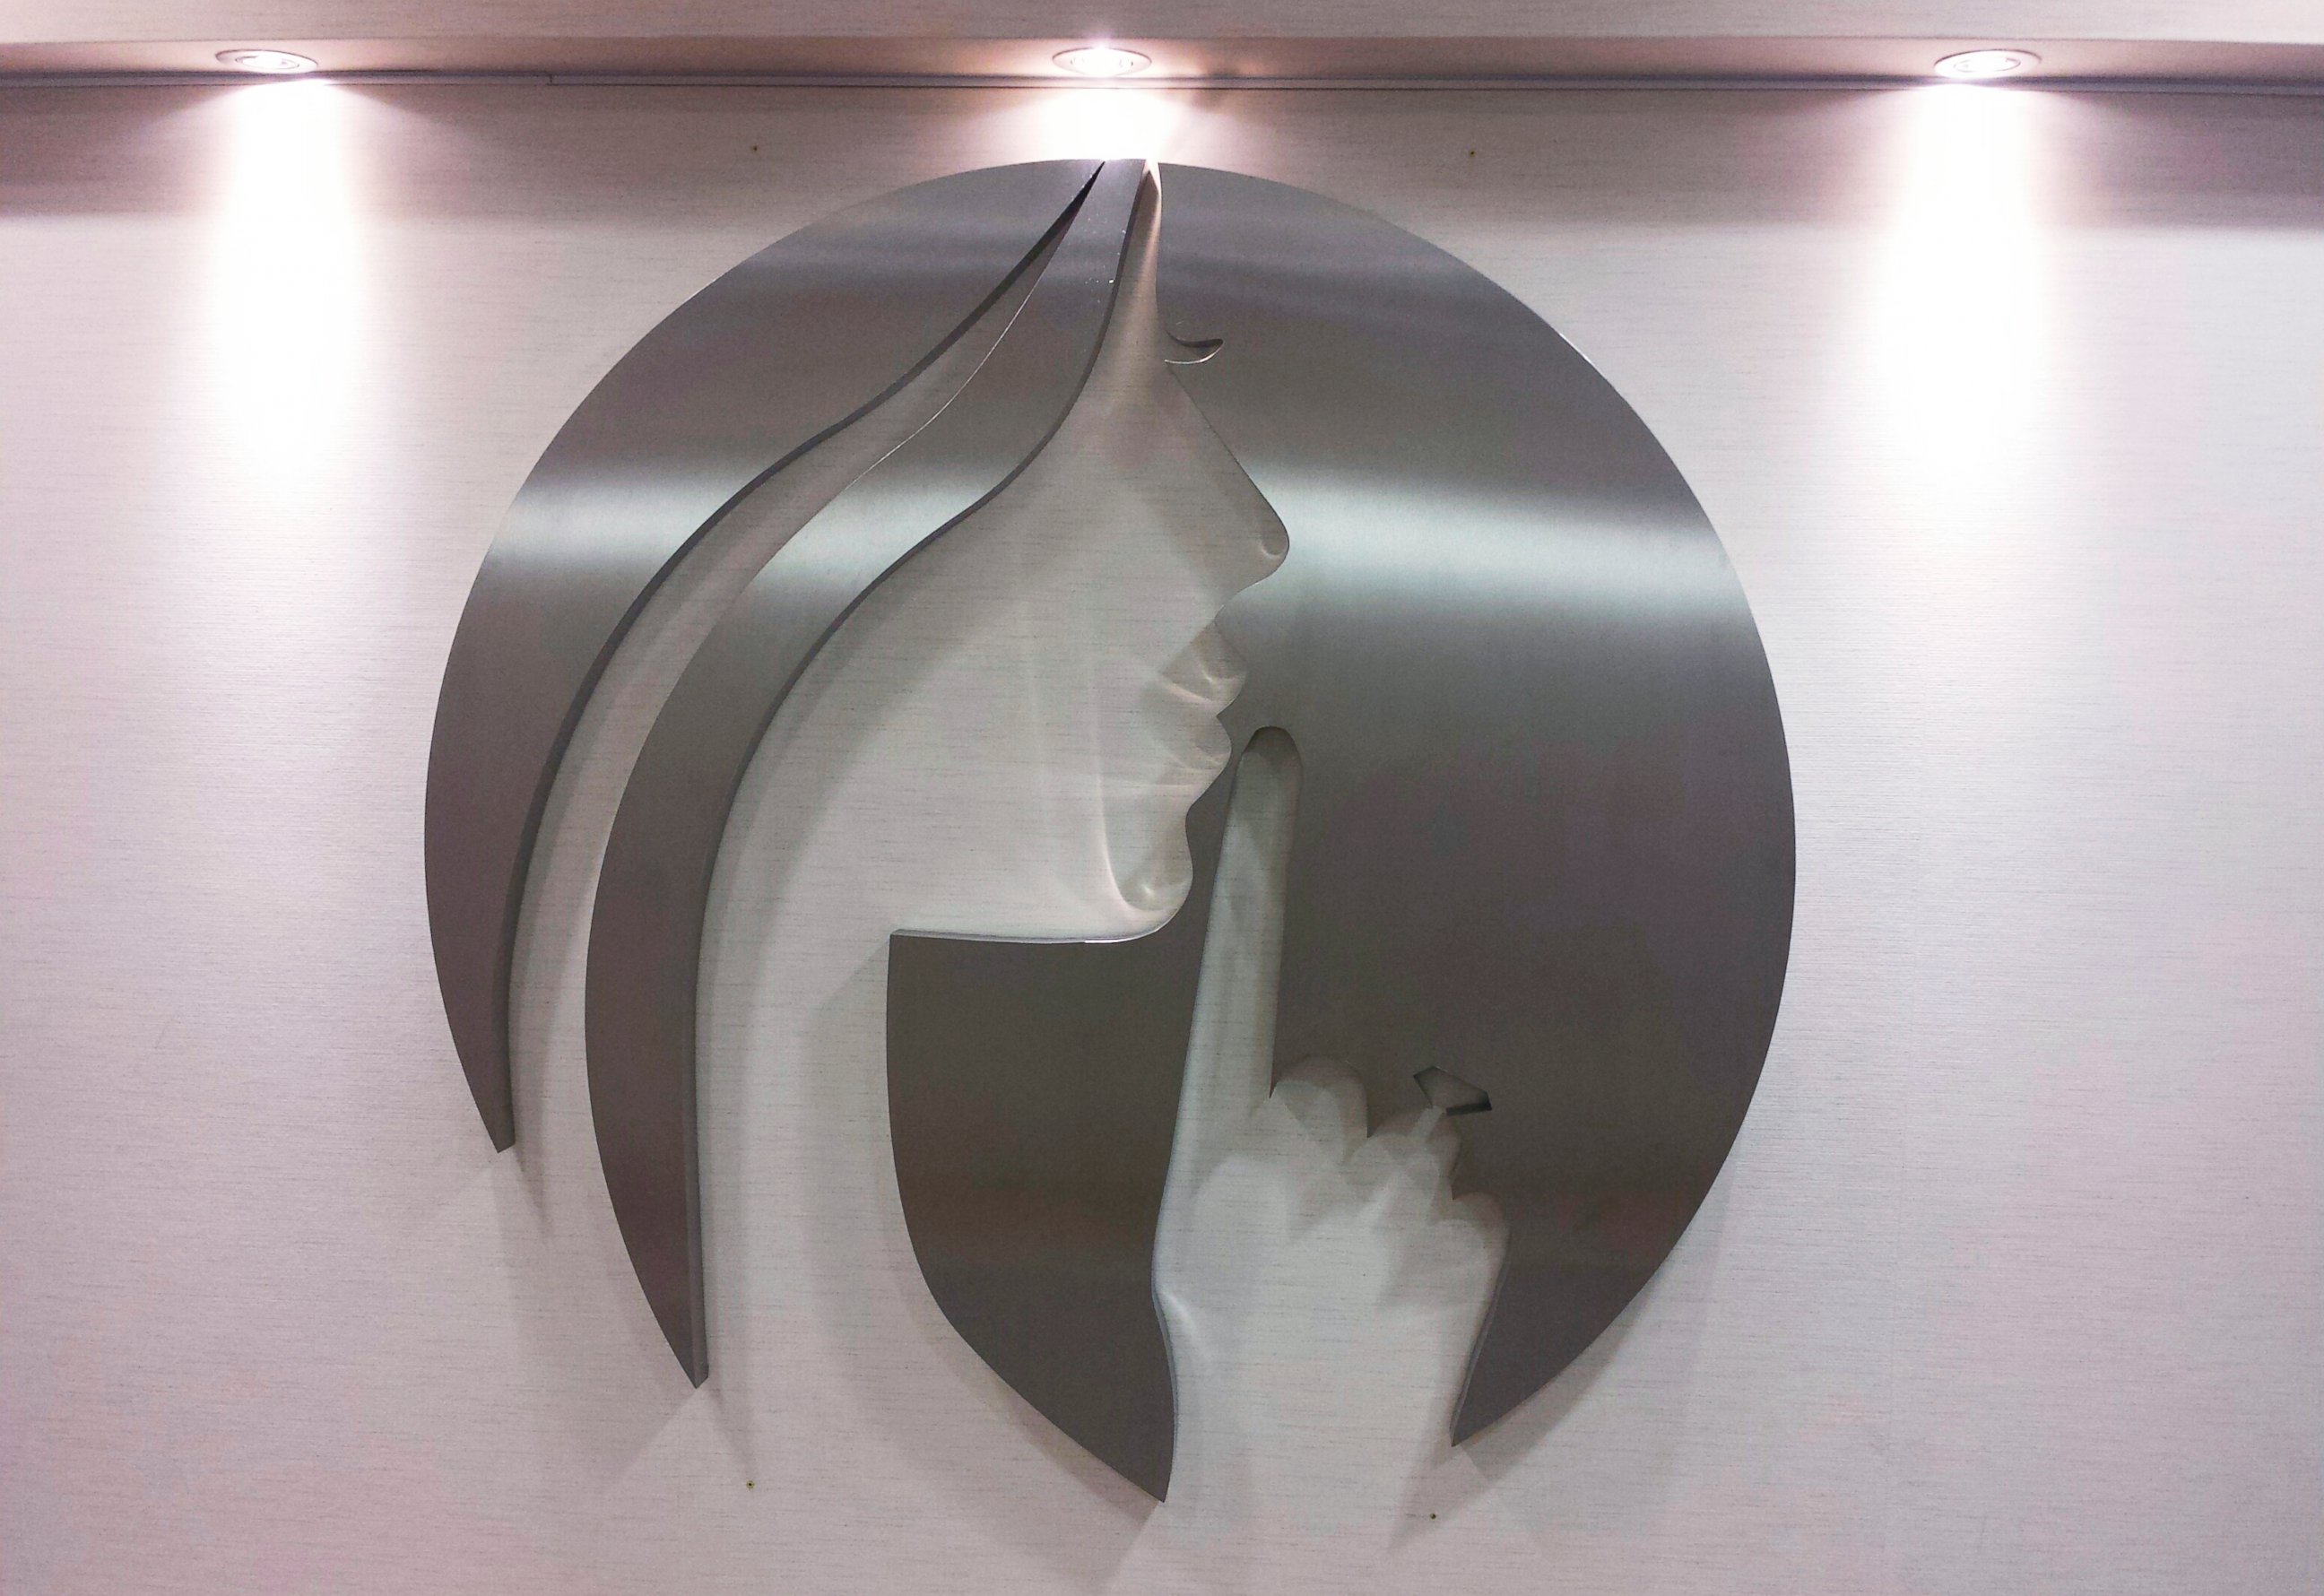 PHOTO: An AshleyMadison.com logo featuring the image of a woman motioning to whisper, is seen at the entry to Avid Life Media's offices in Toronto, July 20, 2015.